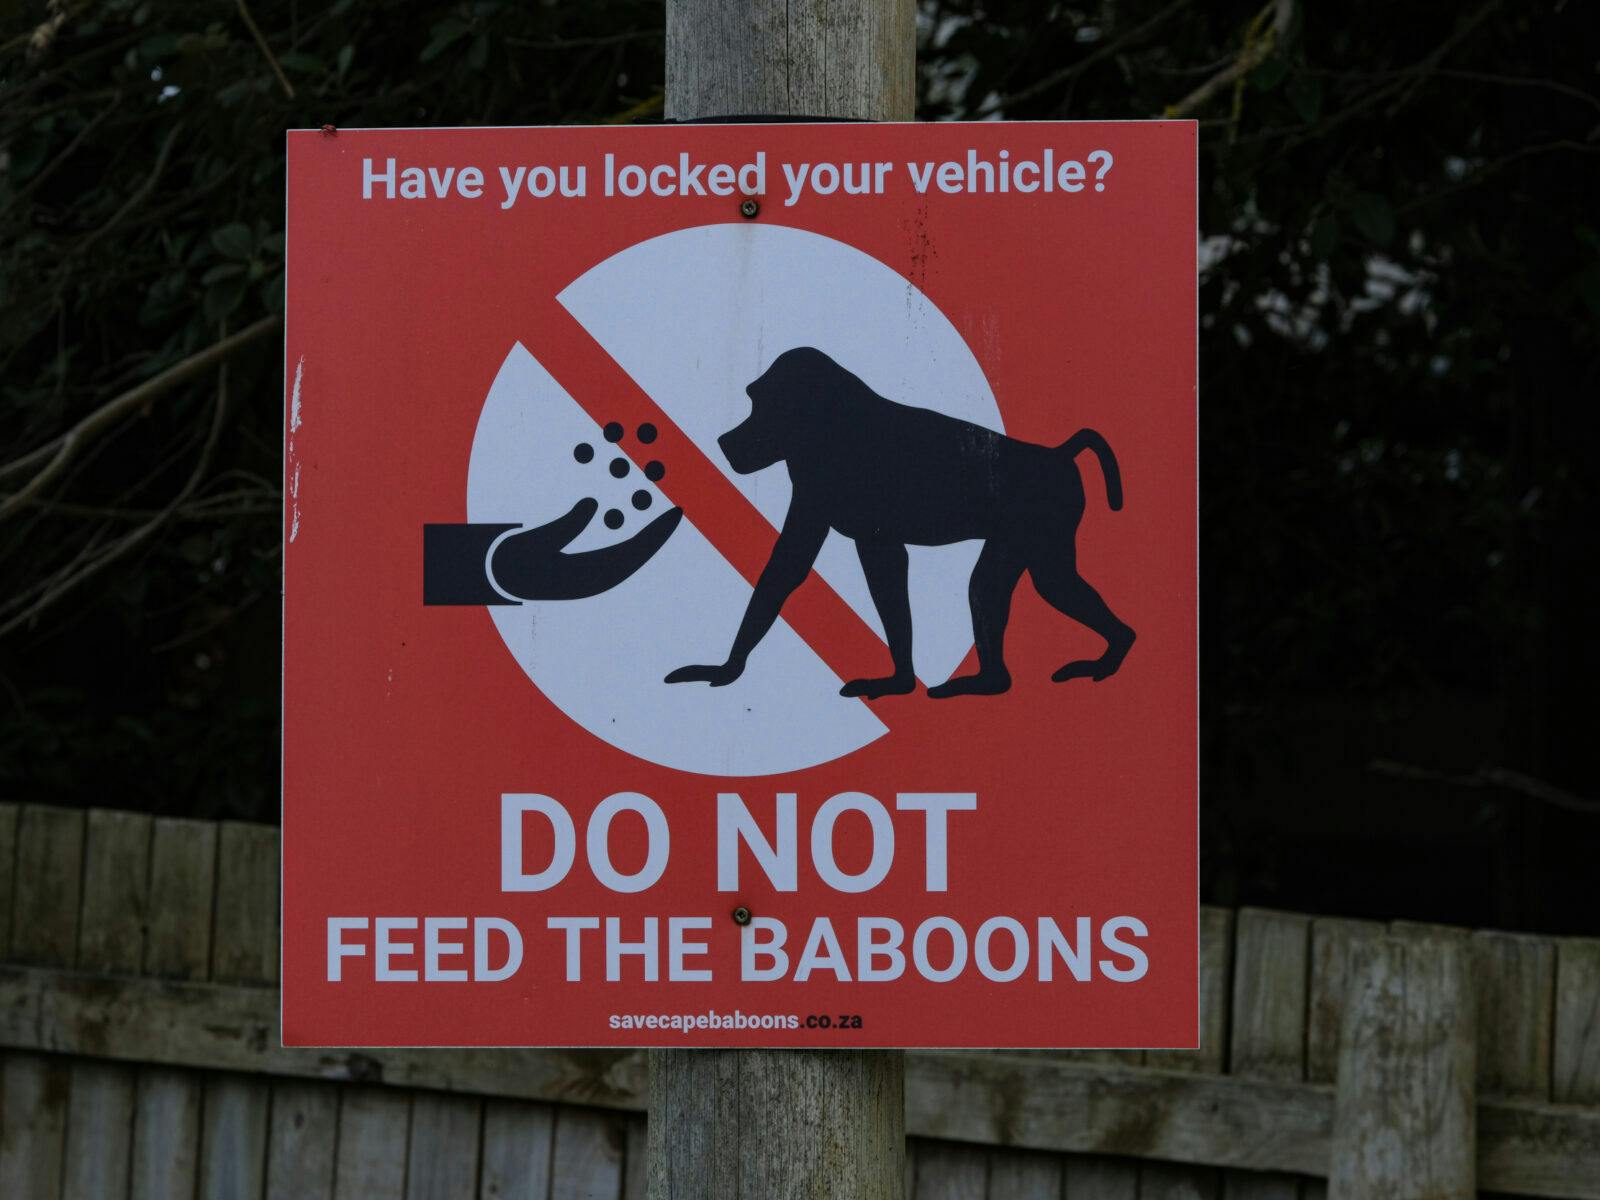 You should not feed the baboons.